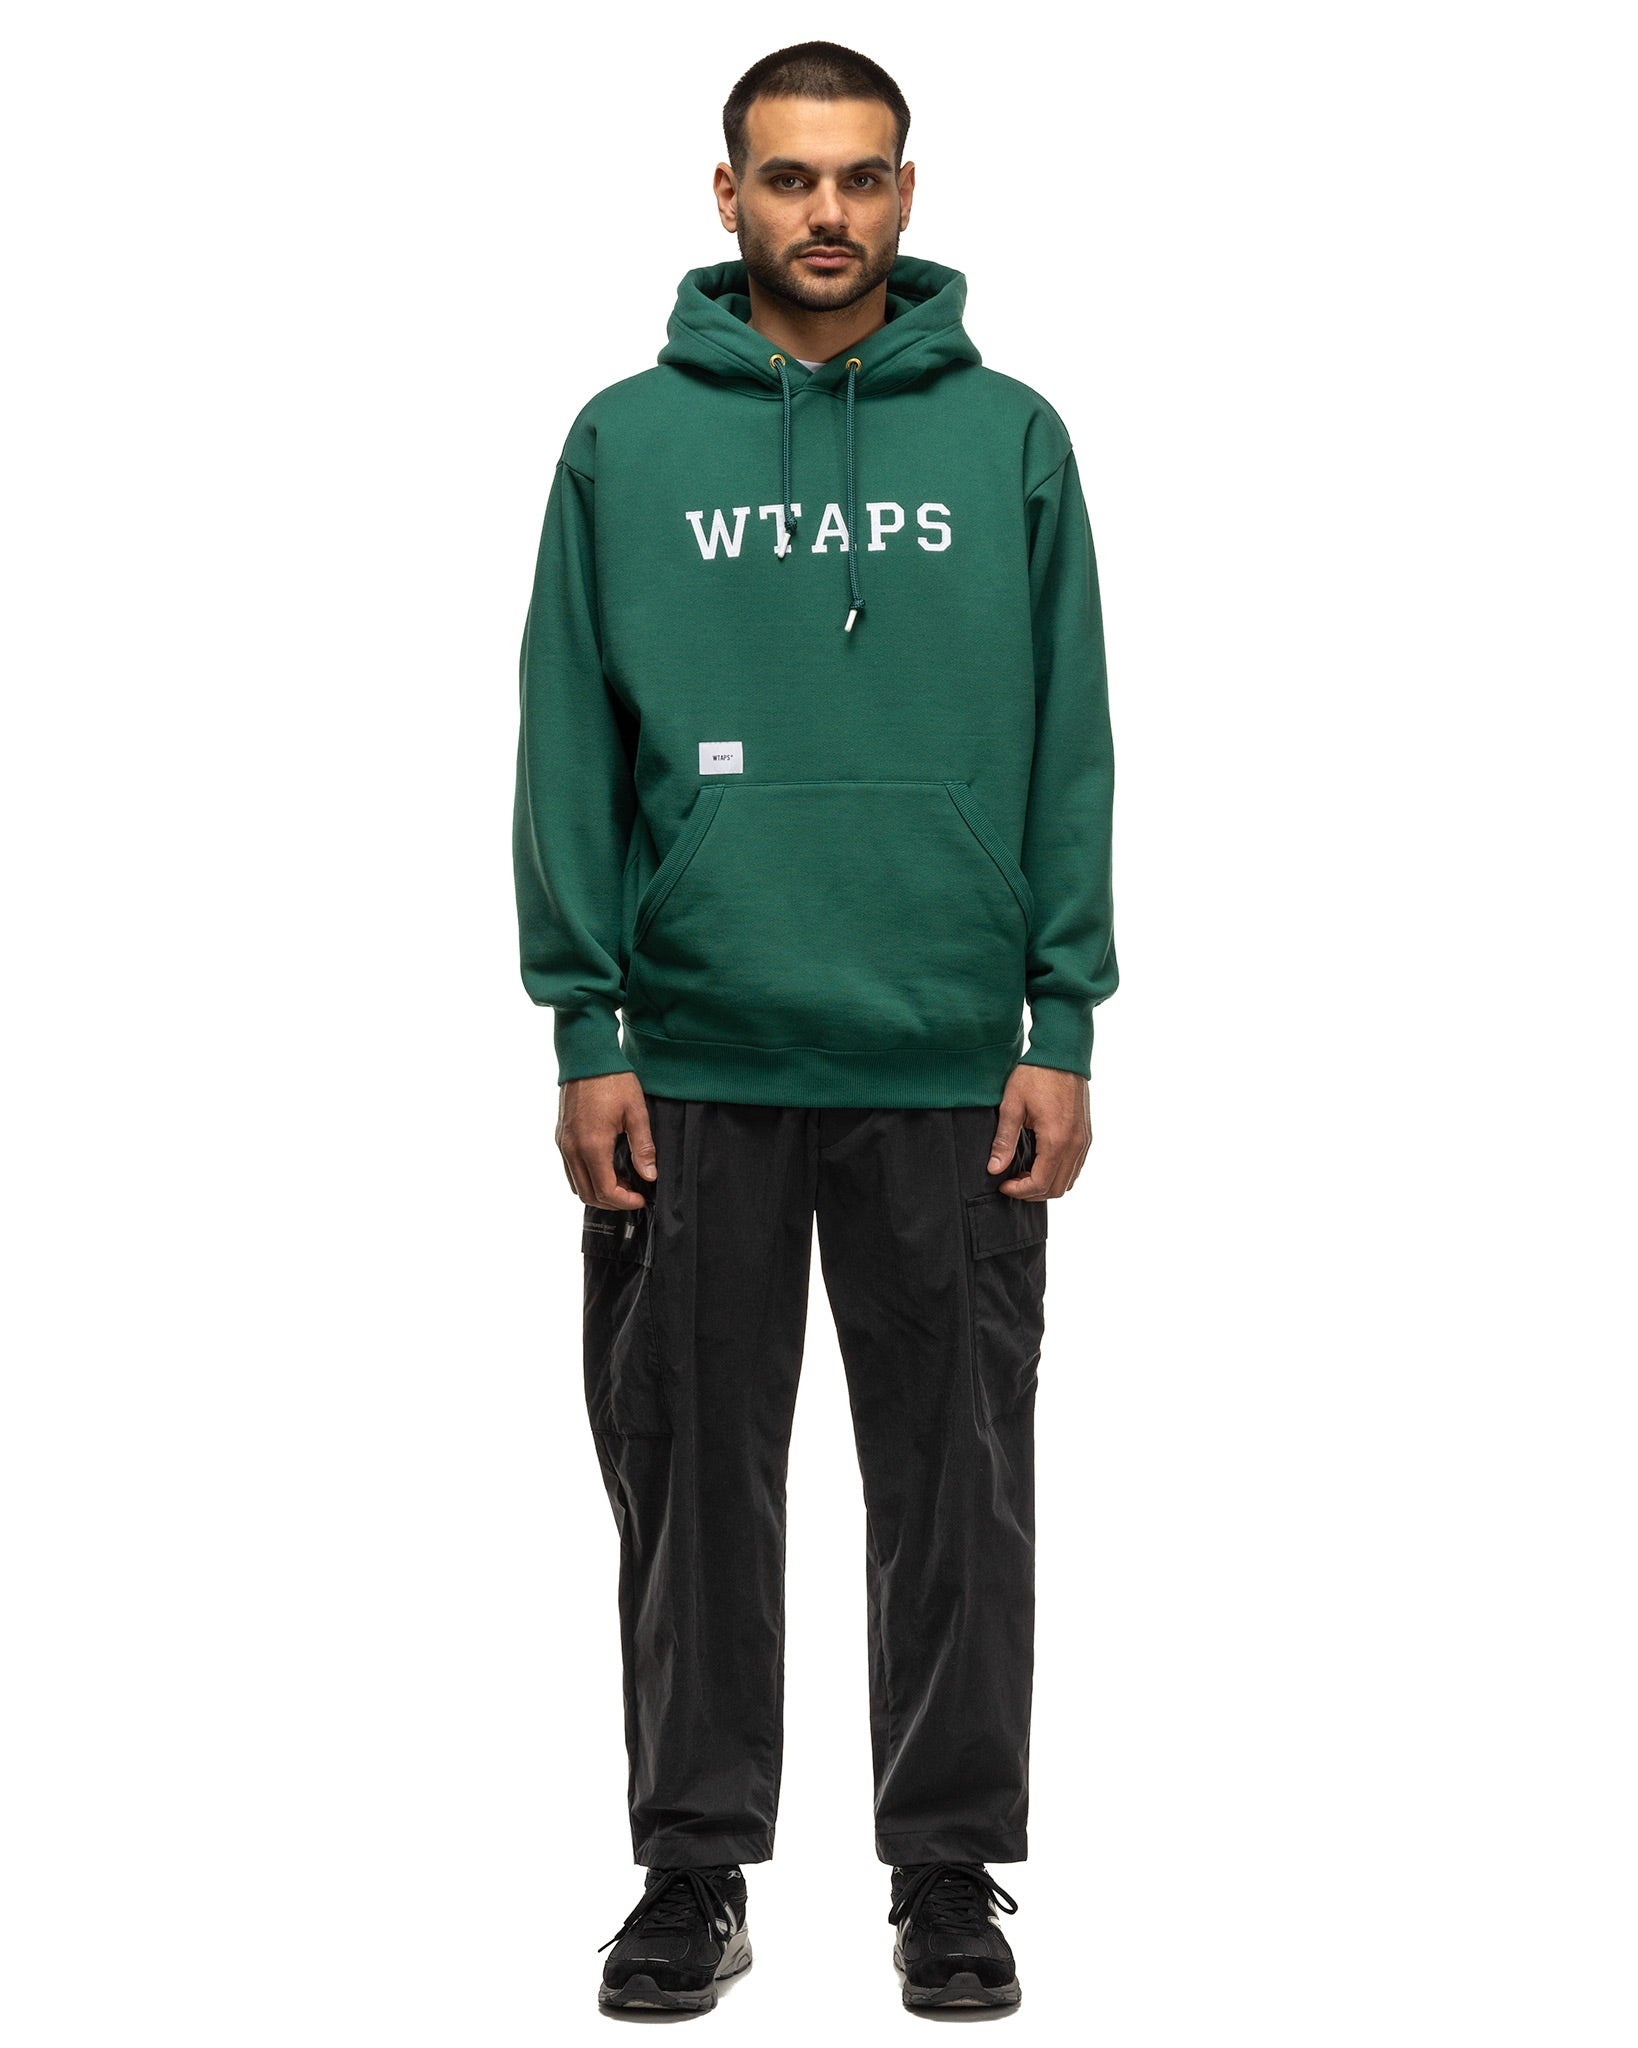 Academy / Hoody / Cotton. College Green - 2